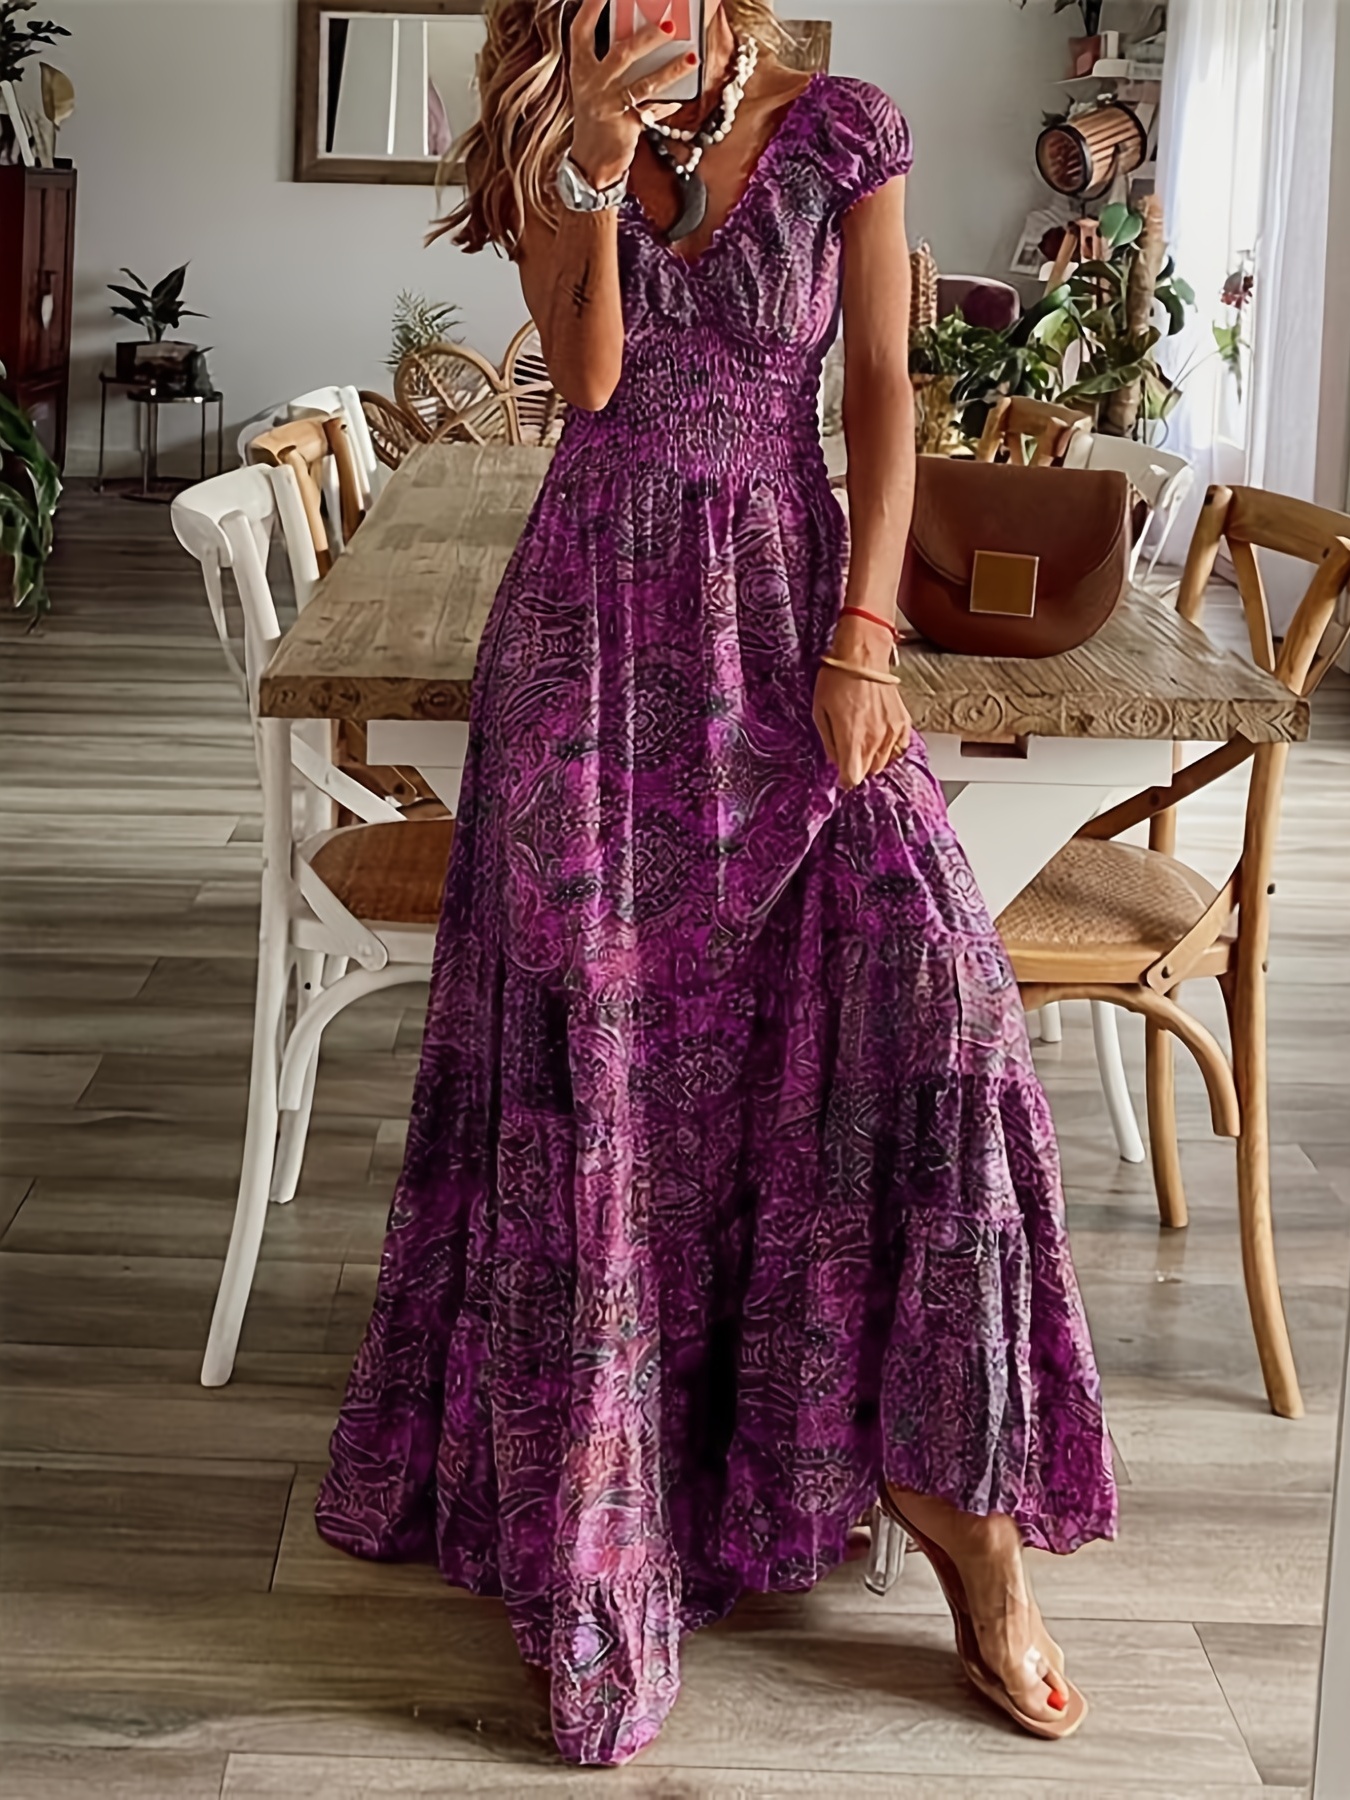 What are Floral Dresses?. Floral dresses are a type of dress that